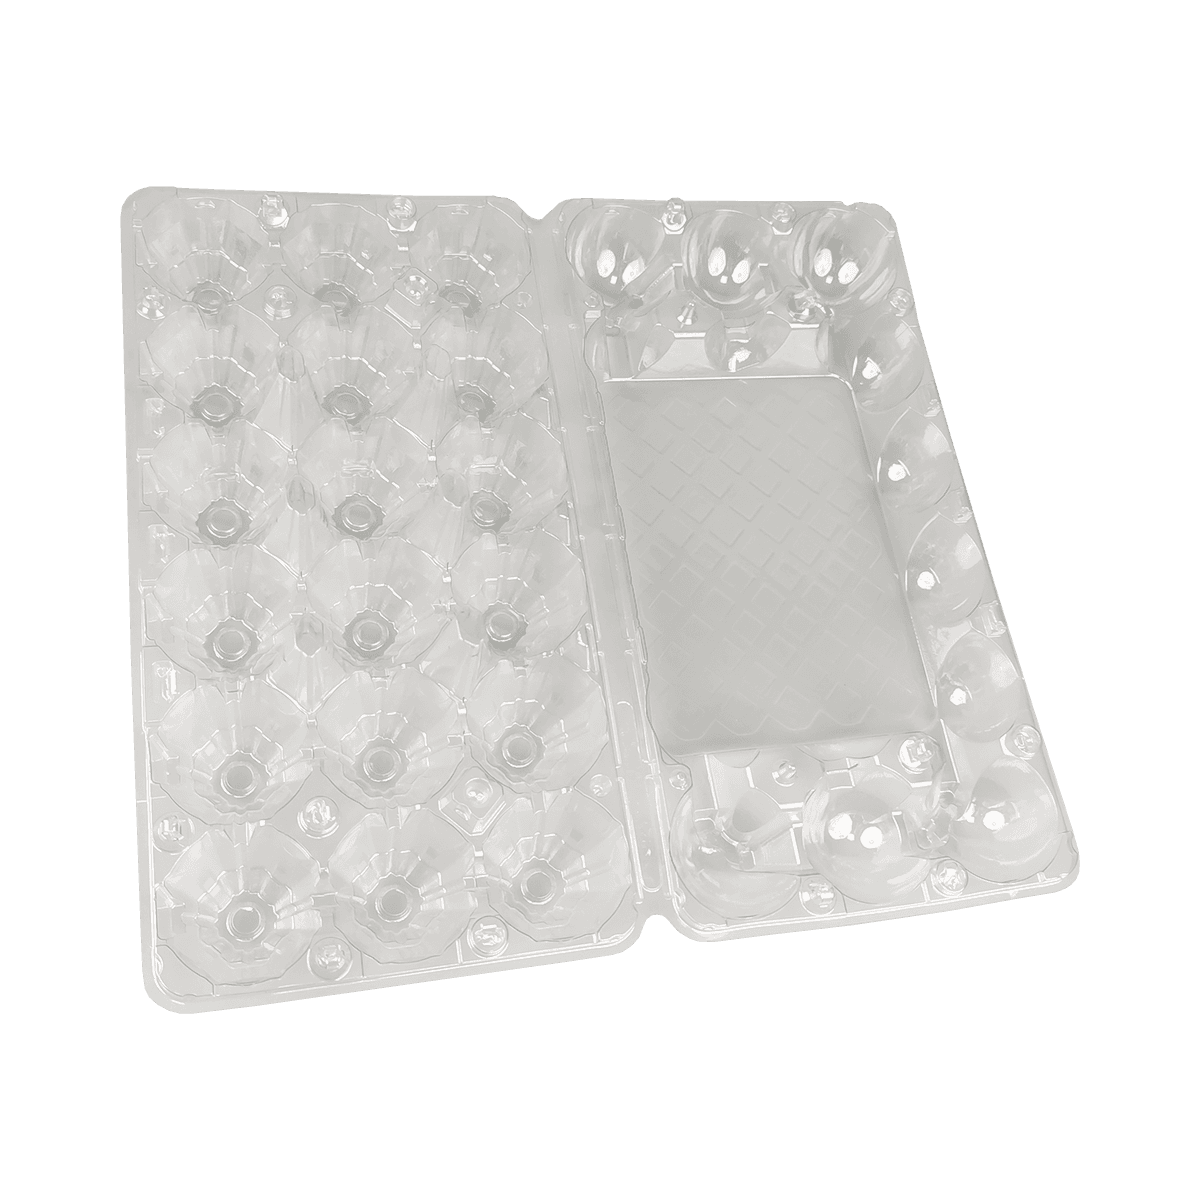 Disposable stackable transparent 18 egg cartons suitable for home refrigerator storage